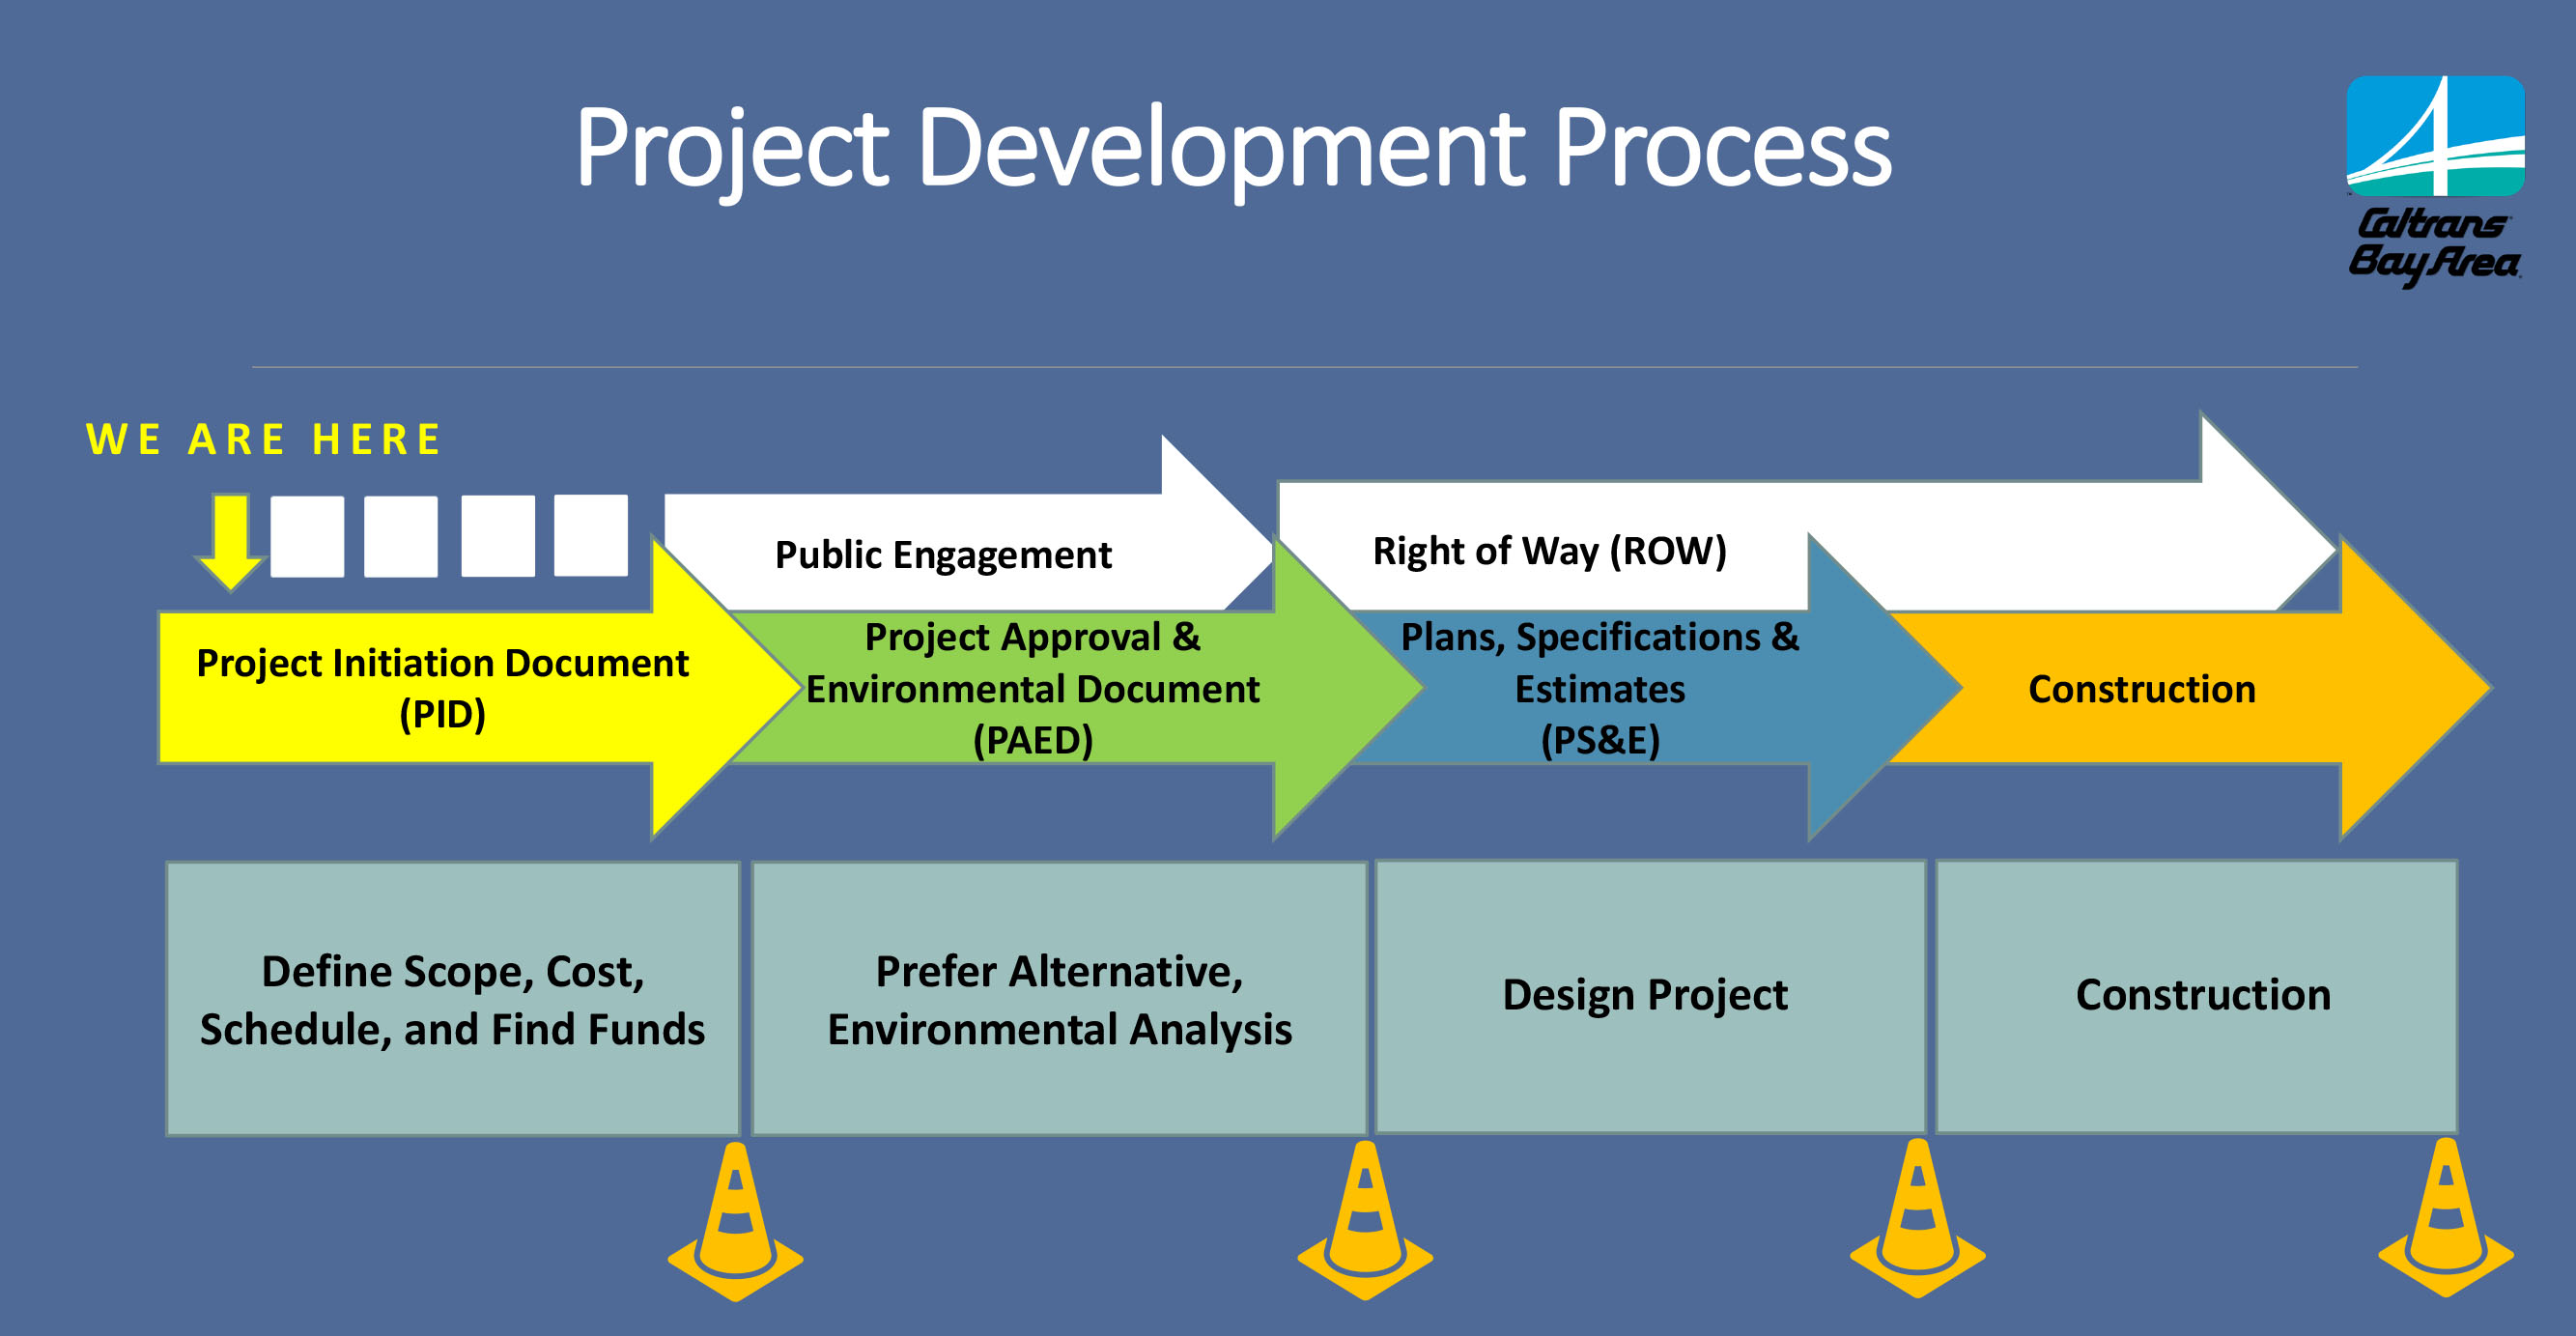 Graphic laying out the Project Development Process. On the left side of the image is a downward-pointing arrow labeled "WE ARE HERE" that points down at a yellow, right-pointing arrow labeled Project Initiation Document (PID). Underneath the yellow arrow is a box that shows what that phase includes that reads "Define Scope, Cost, Schedule, and Find Funds". The PID arrow points at two additional arrows: a white, right-pointing arrow that's labeled "Public Engagement" and a green, right-pointing arrow labeled "Project Approval & Environmental Document (PAED). Beneath the Public Engagement and PAED arrows is a box that shows what this phase includes that reads "Prefer Alternative, Environmental Analysis". The Public Engagement arrow points at another white, right-pointing arrow that is labeled "Right of Way (ROW)". The PAED arrow points at a blue, right-pointing arrow labeled "Plans, Specifications & Estimates (PS&E)". Underneath the ROW and PS&E triangles is a box that shows what that phase includes that reads "Design Project". The PS&E arrow points at an orange arrow, which is also under the ROW arrow, that reads "Construction". Underneath the orange arrow is a box that shows what that phase includes that reads "Construction".